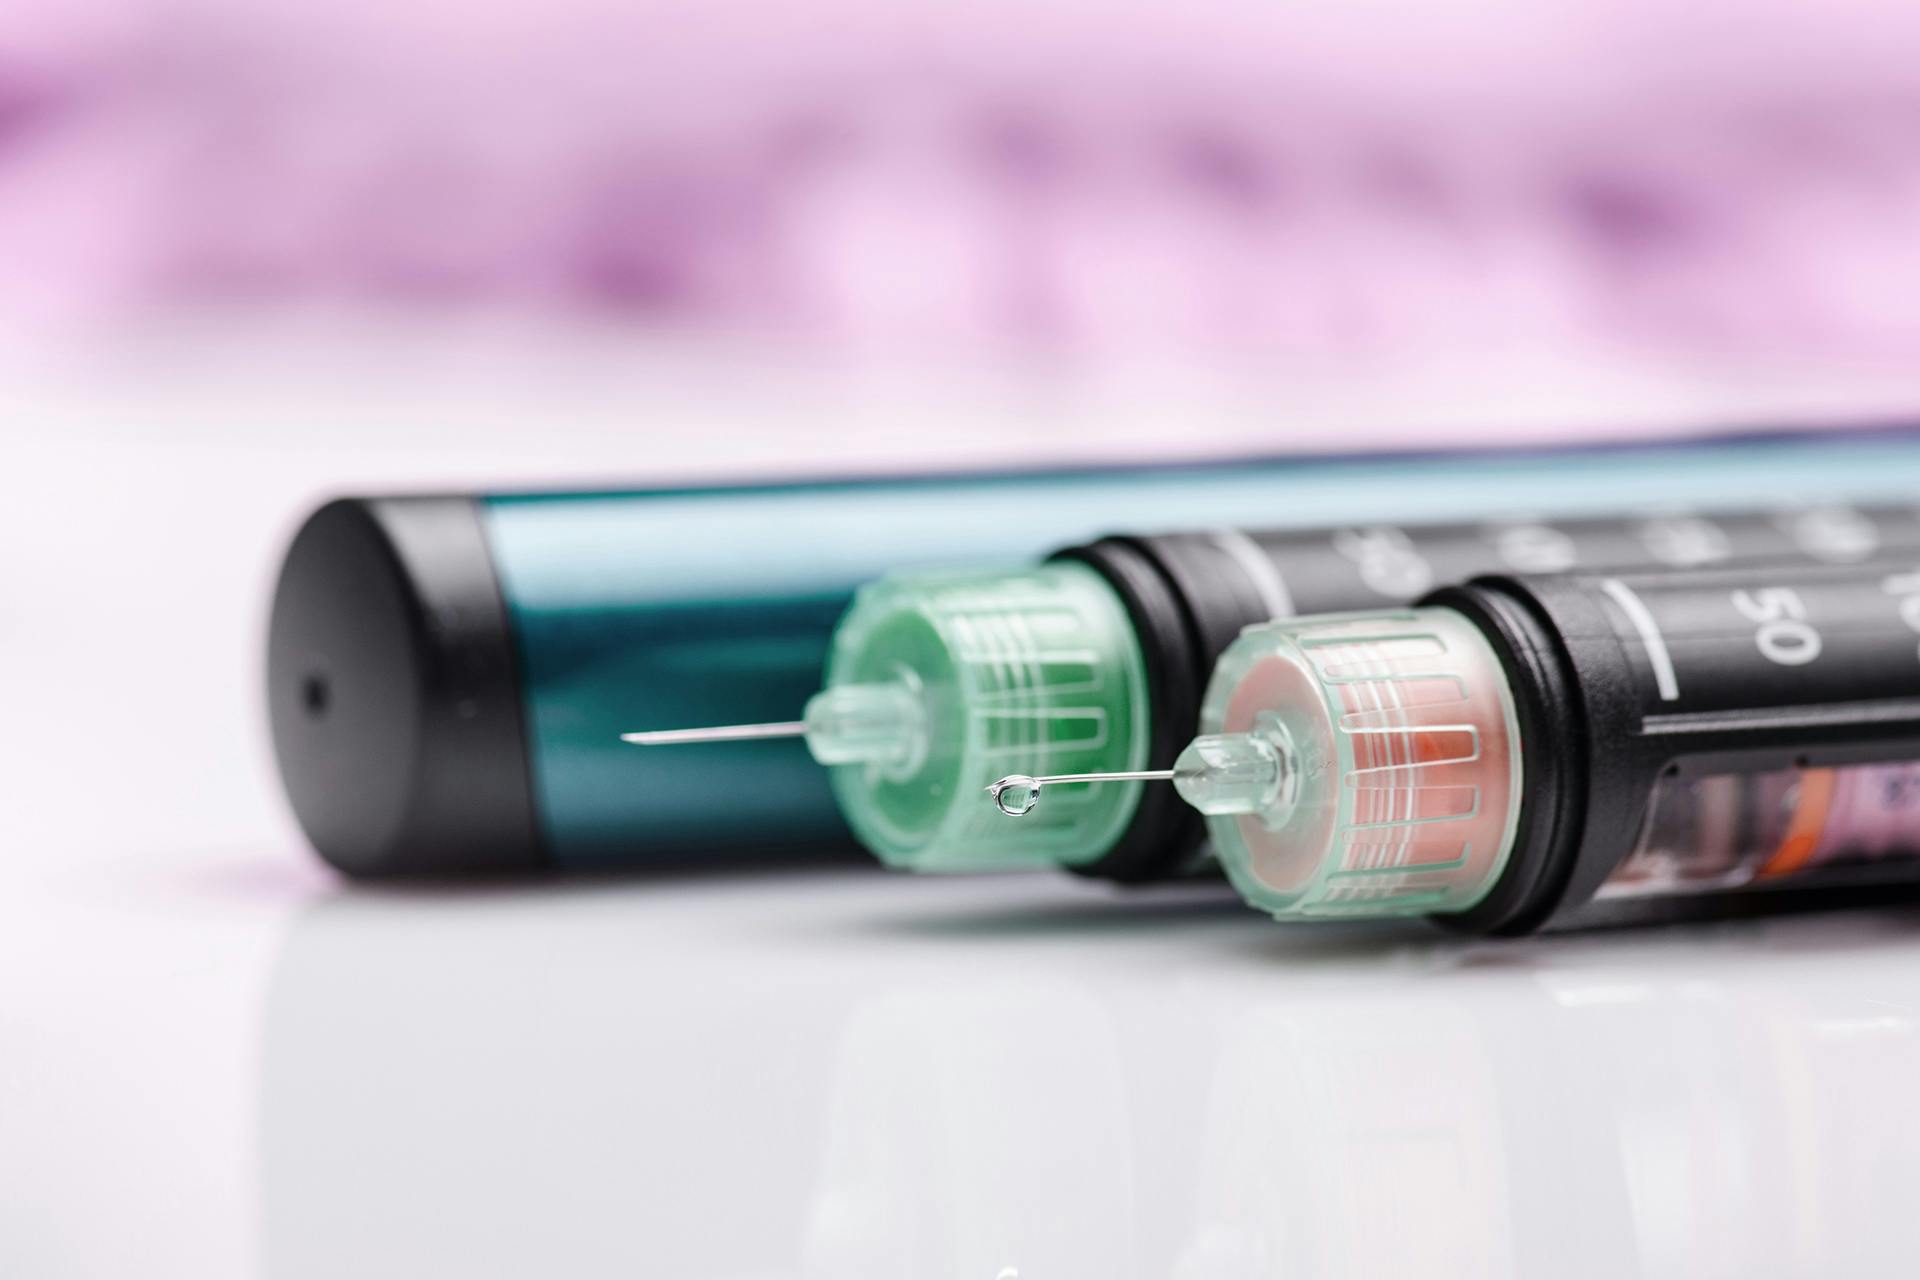 Quality inspection of insulin pens with VITRONIC solutions